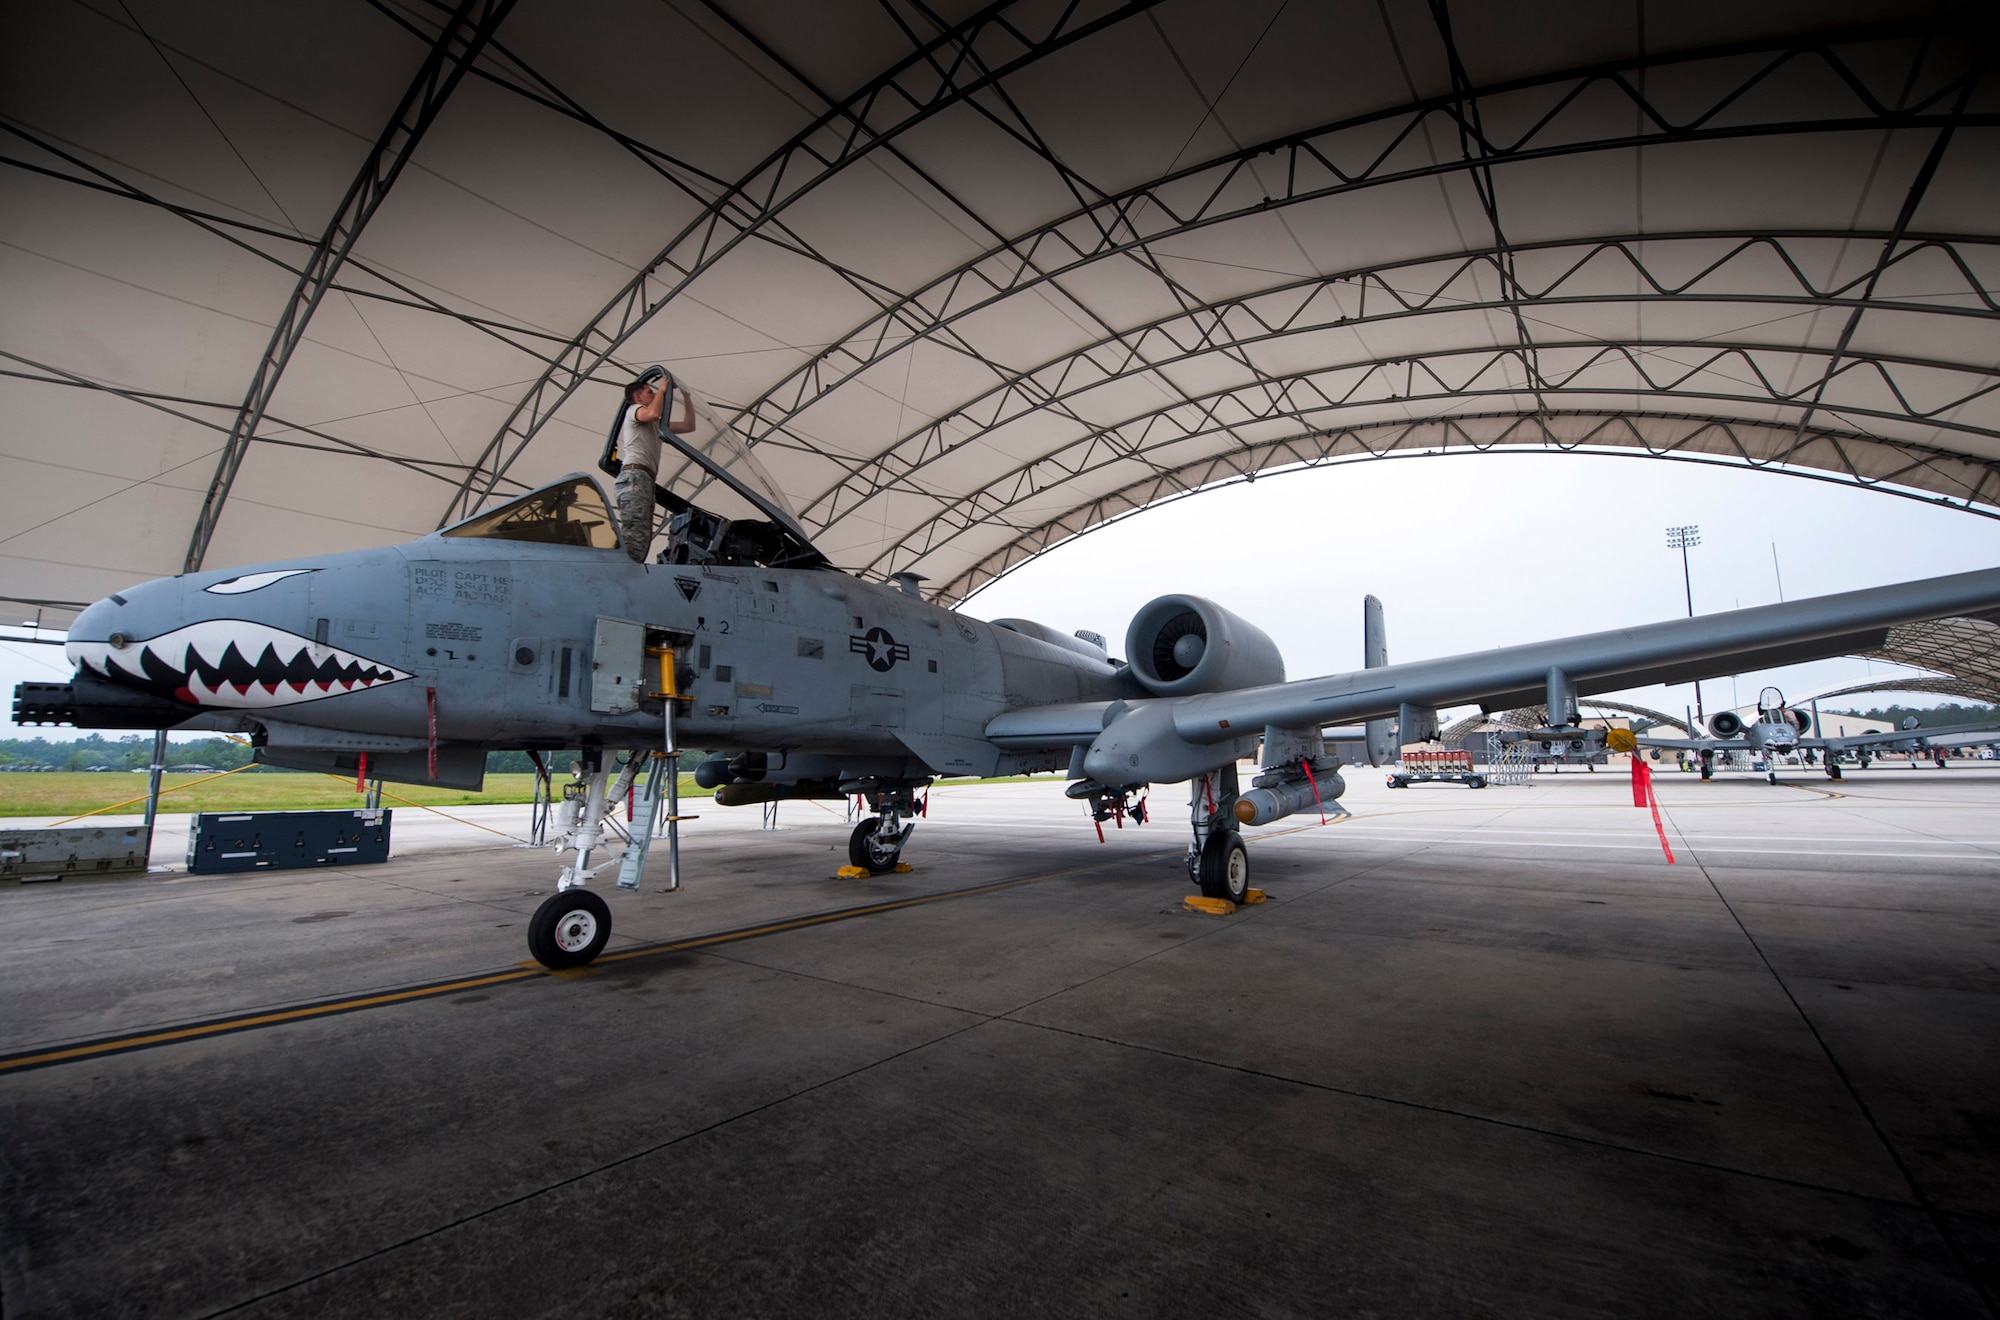 U.S. Air Force Airman 1st Class James Sprunk, 74th Aircraft Maintenance Unit crew chief, prepares an A-10C Thunderbolt II for take-off, April 28, 2016, at Moody Air Force Base, Ga. The 74th AMU recently deployed to Eastern Europe as part of the 74th Expeditionary Fighter Squadron in support of Operation Atlantic Resolve. (U.S. Air Force photo by Airman 1st Class Lauren M. Hunter/Released)